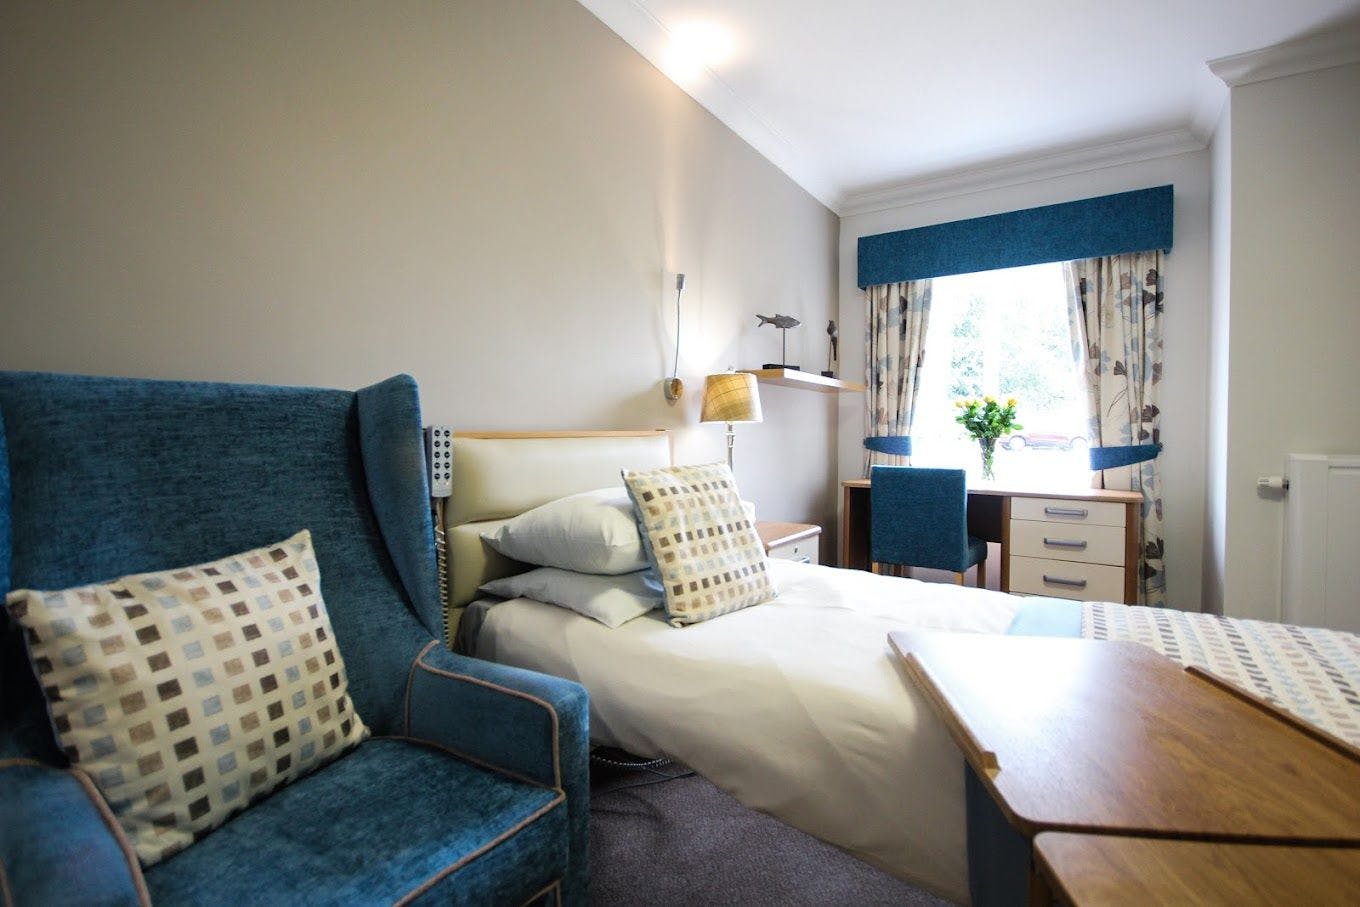 Bedroom of The Moors care home in Ripon, Yorkshire